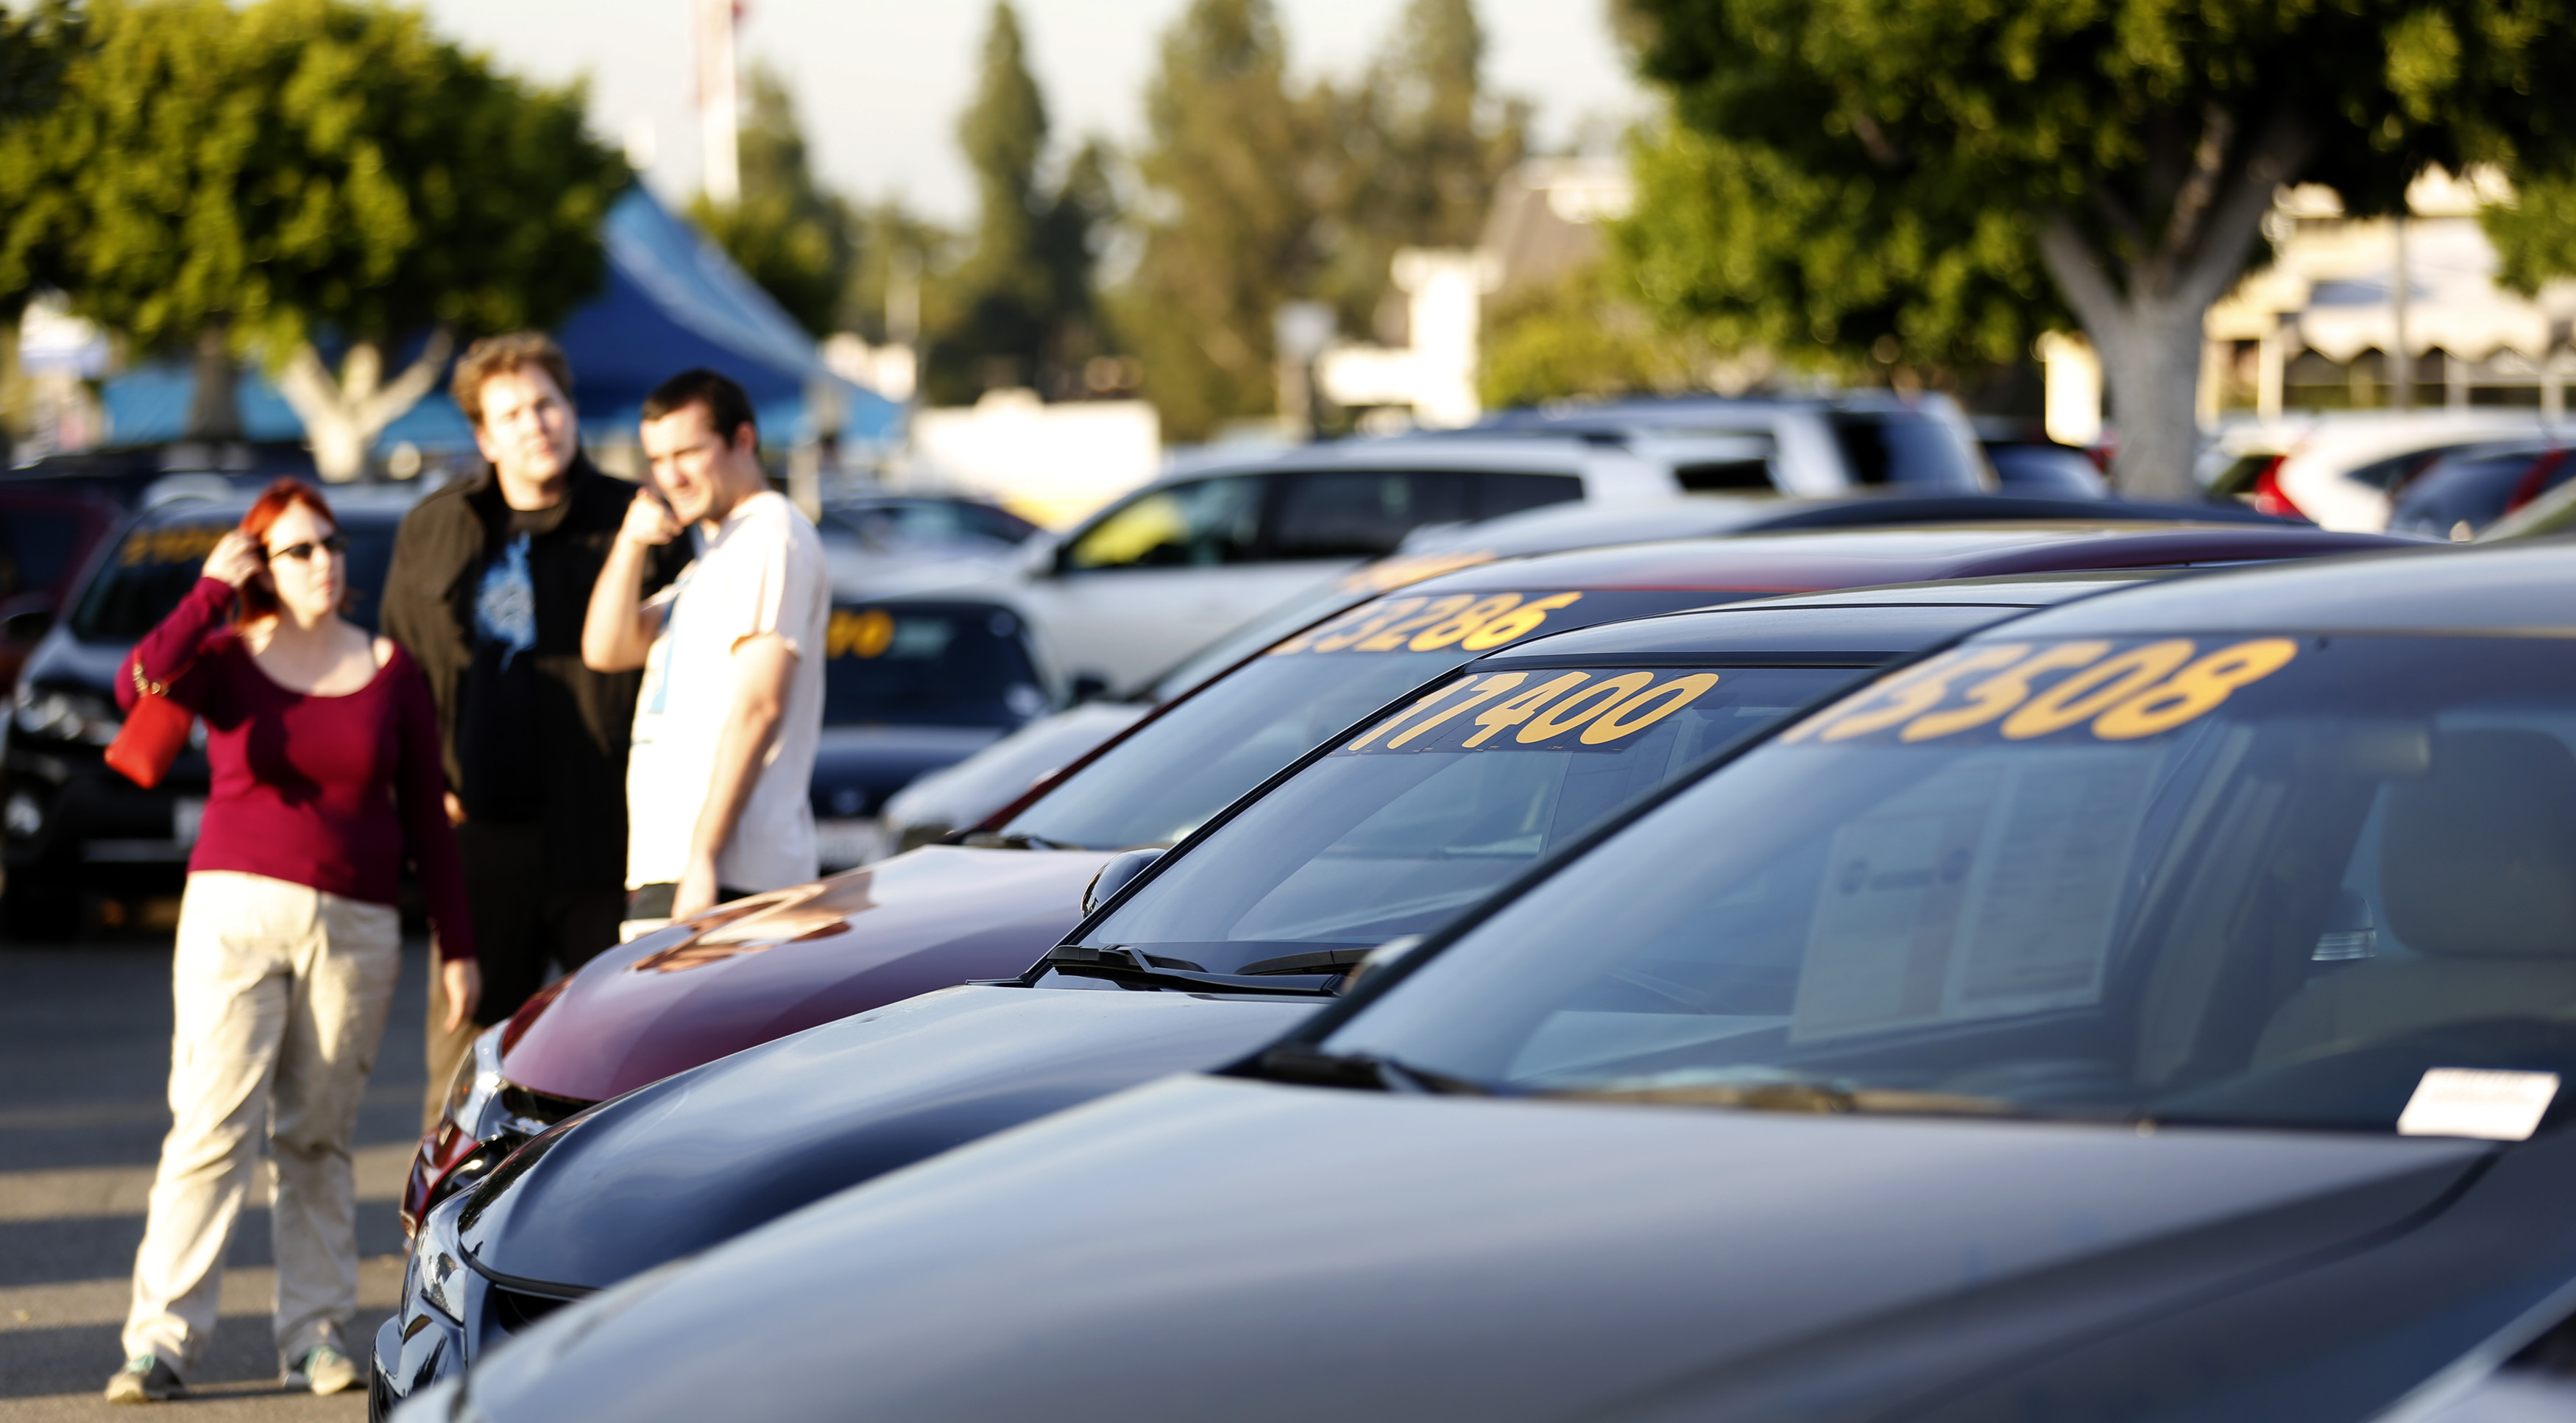 People look at vehicles for sale on the lot at AutoNation dealership in Cerritos